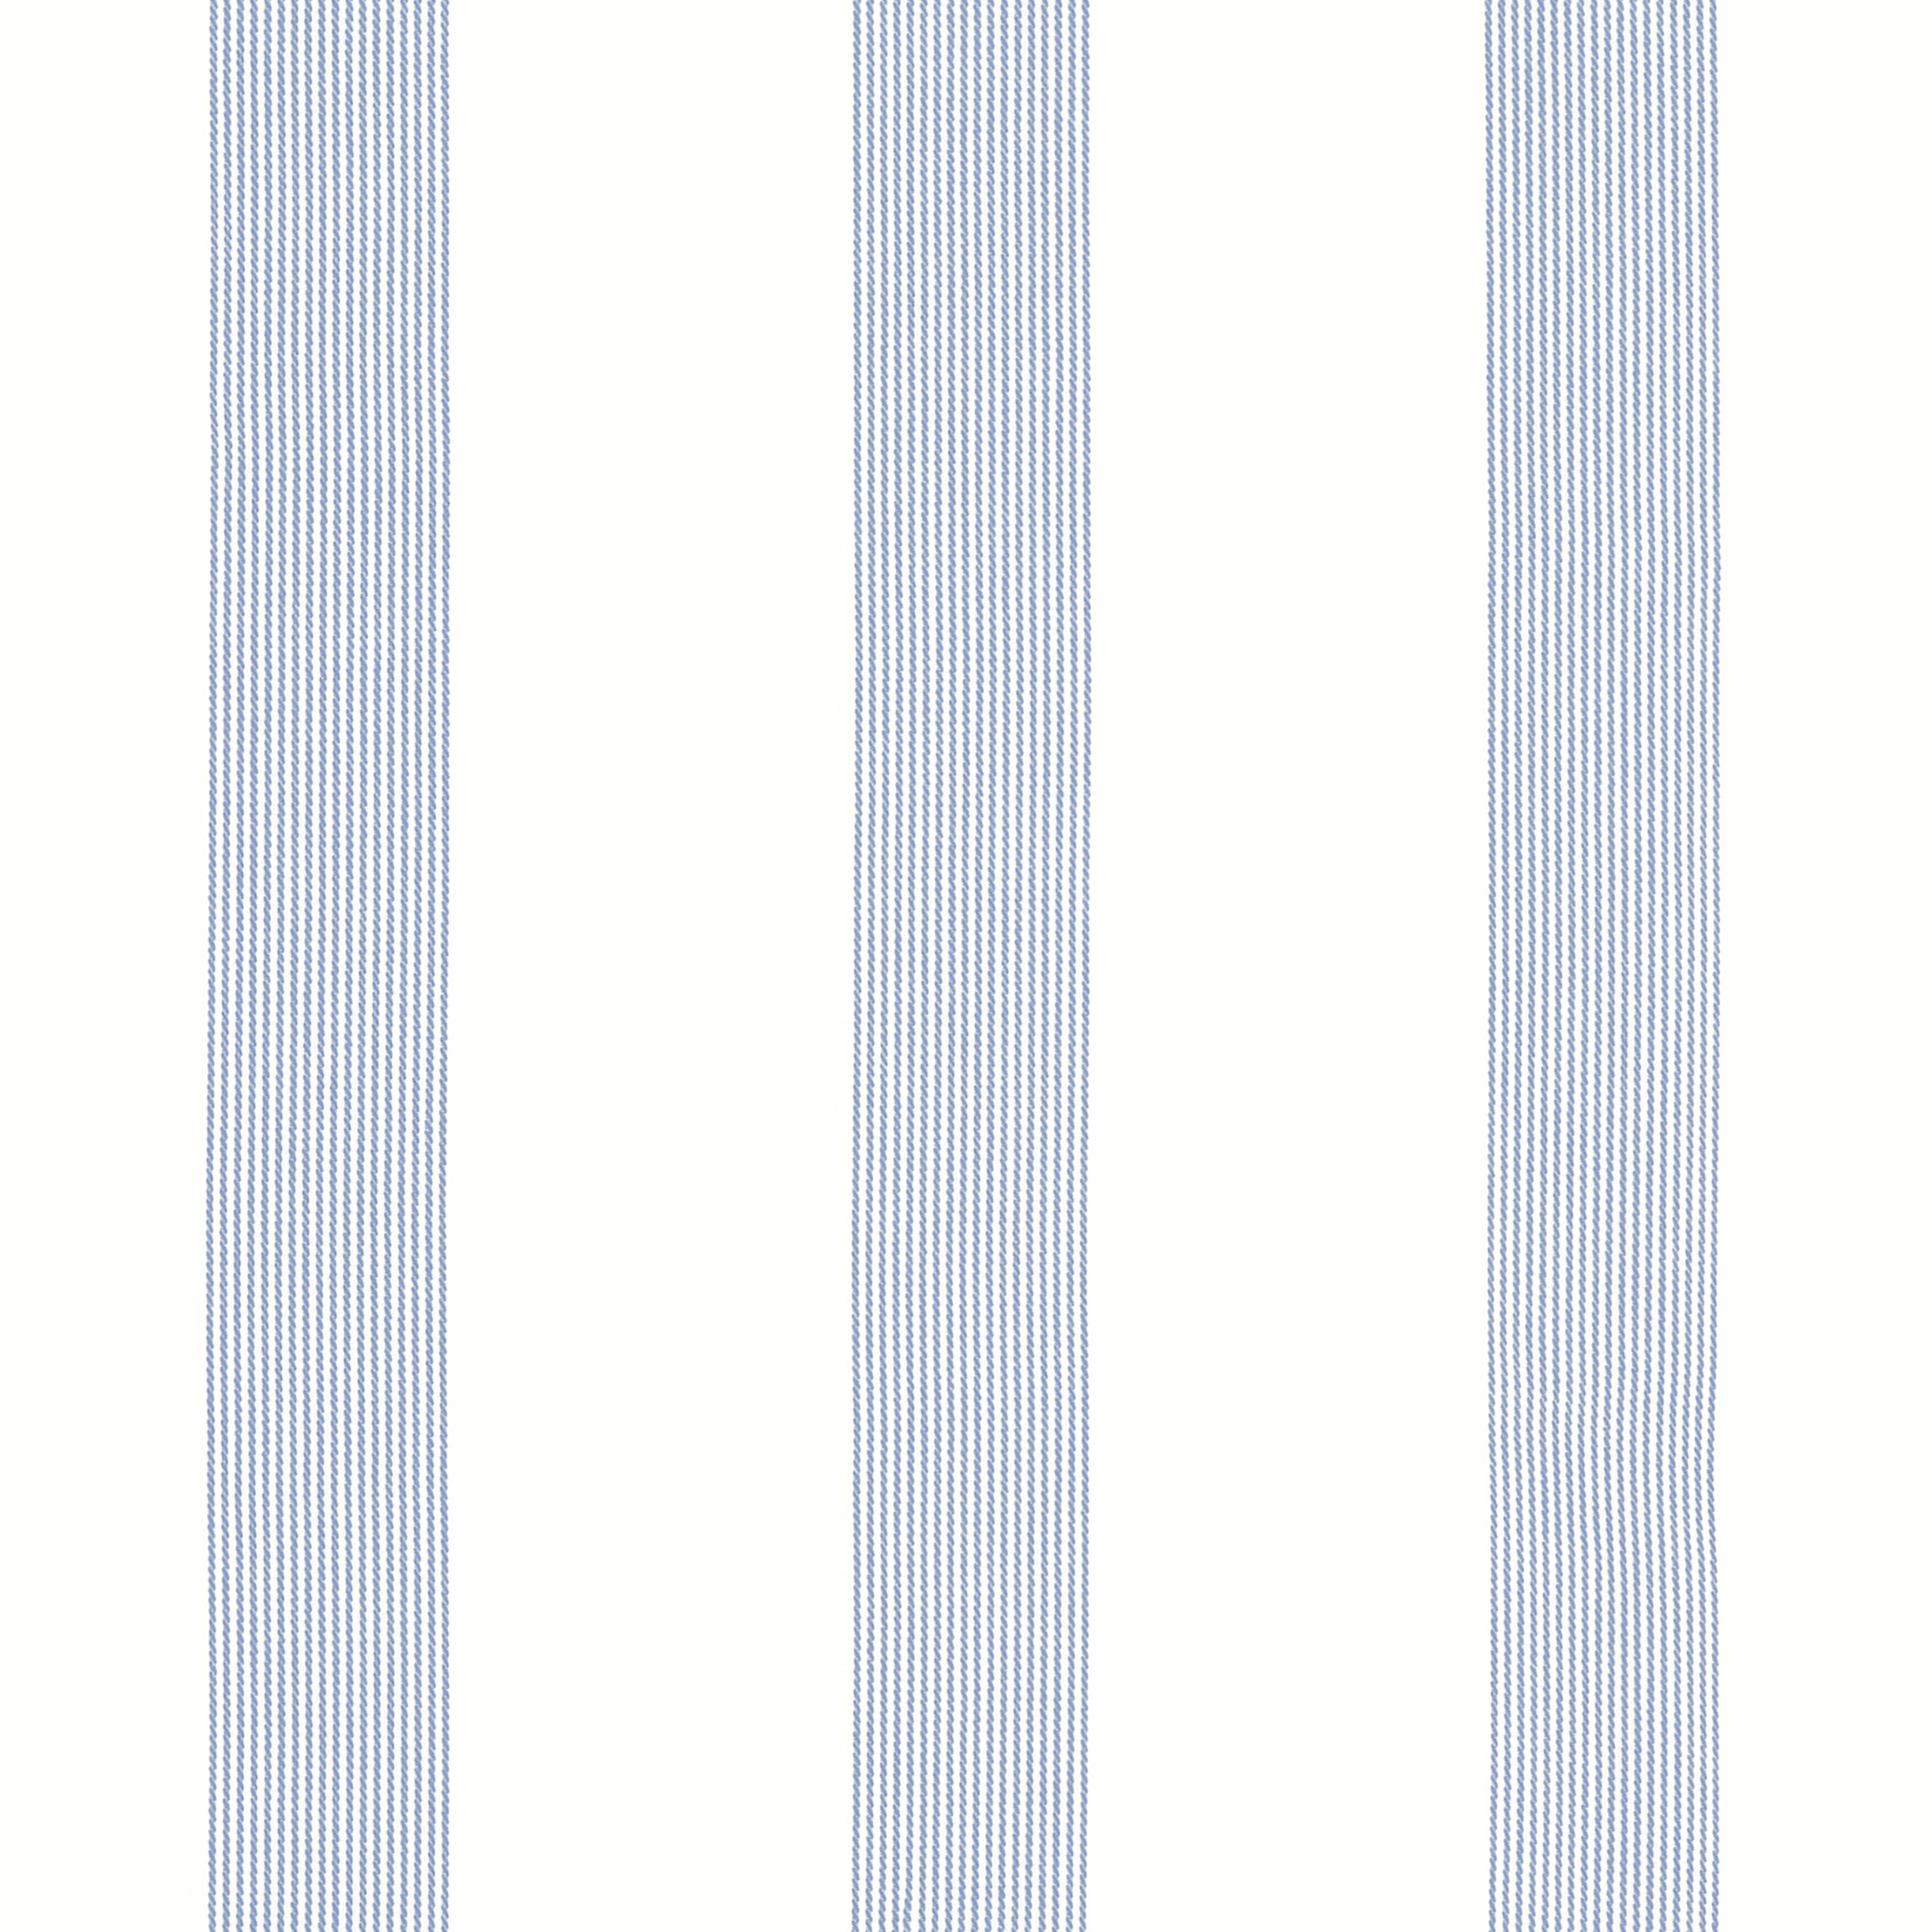 Sabine fabric in stripe oxford blue color - pattern number FWW81736 - by Thibaut in the Locale Wide Width collection